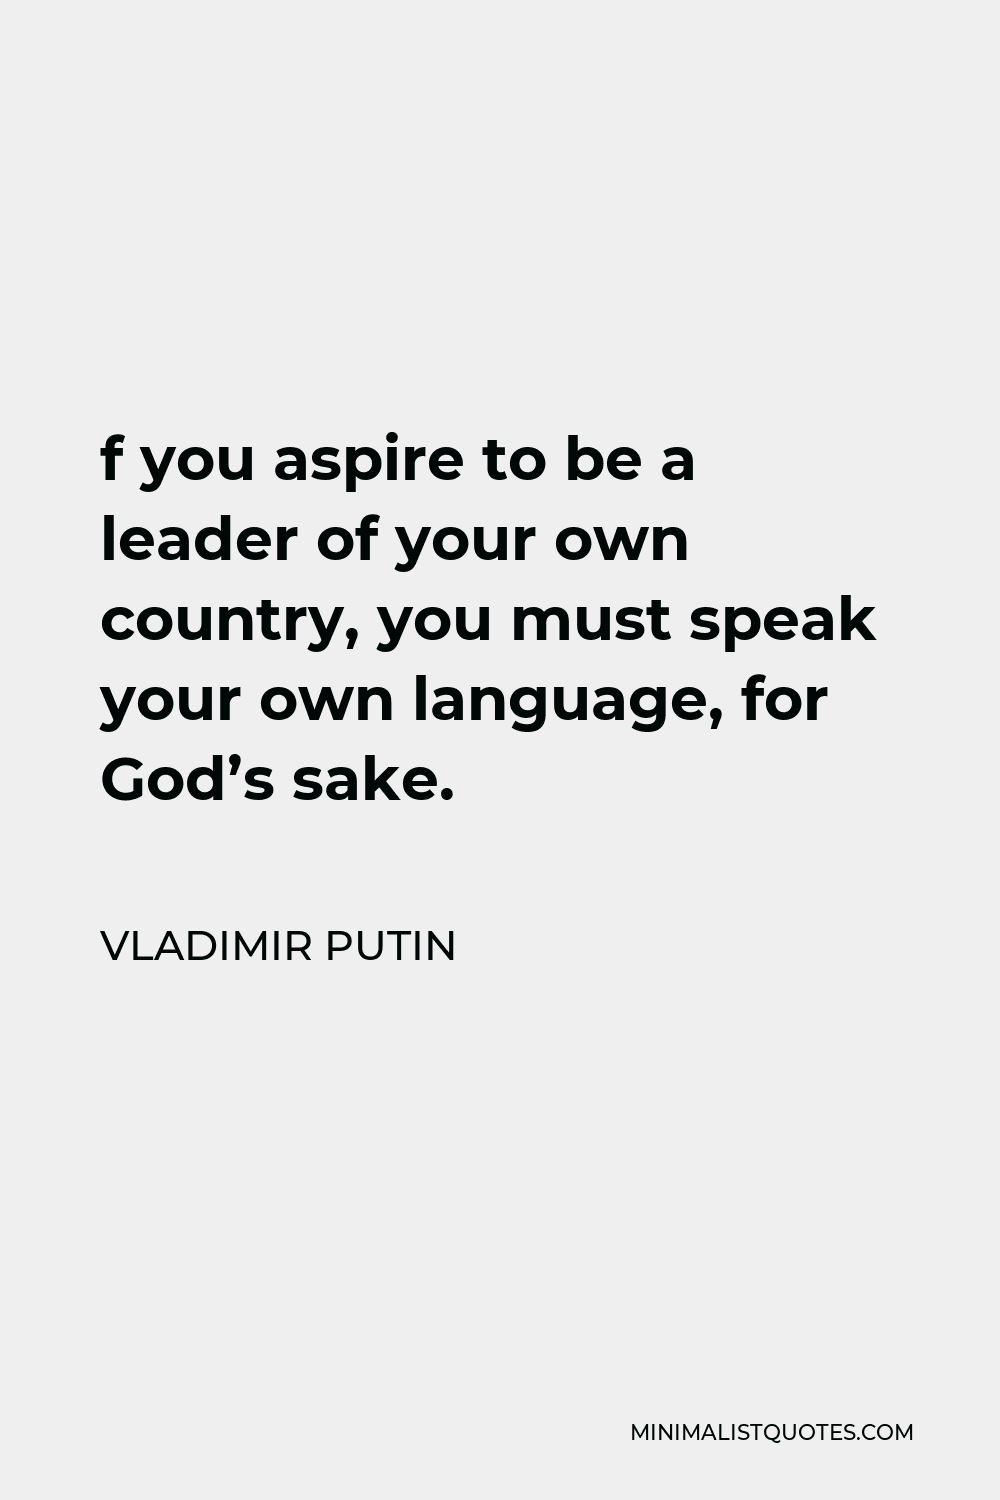 Vladimir Putin Quote - f you aspire to be a leader of your own country, you must speak your own language, for God’s sake.